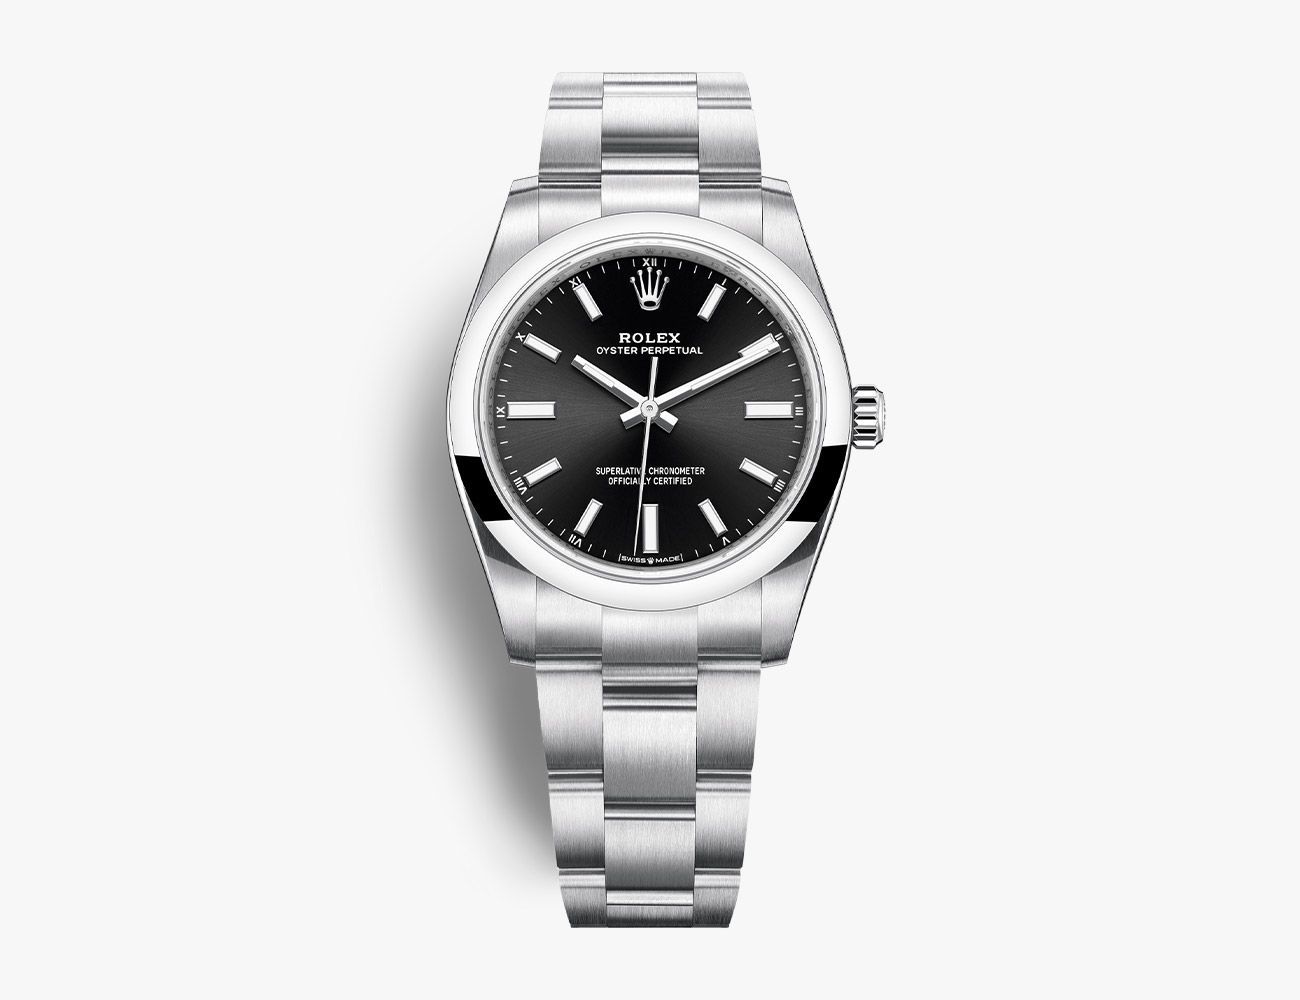 Top 5 Best Entry Level Luxury Watches - WatchReviewBlog